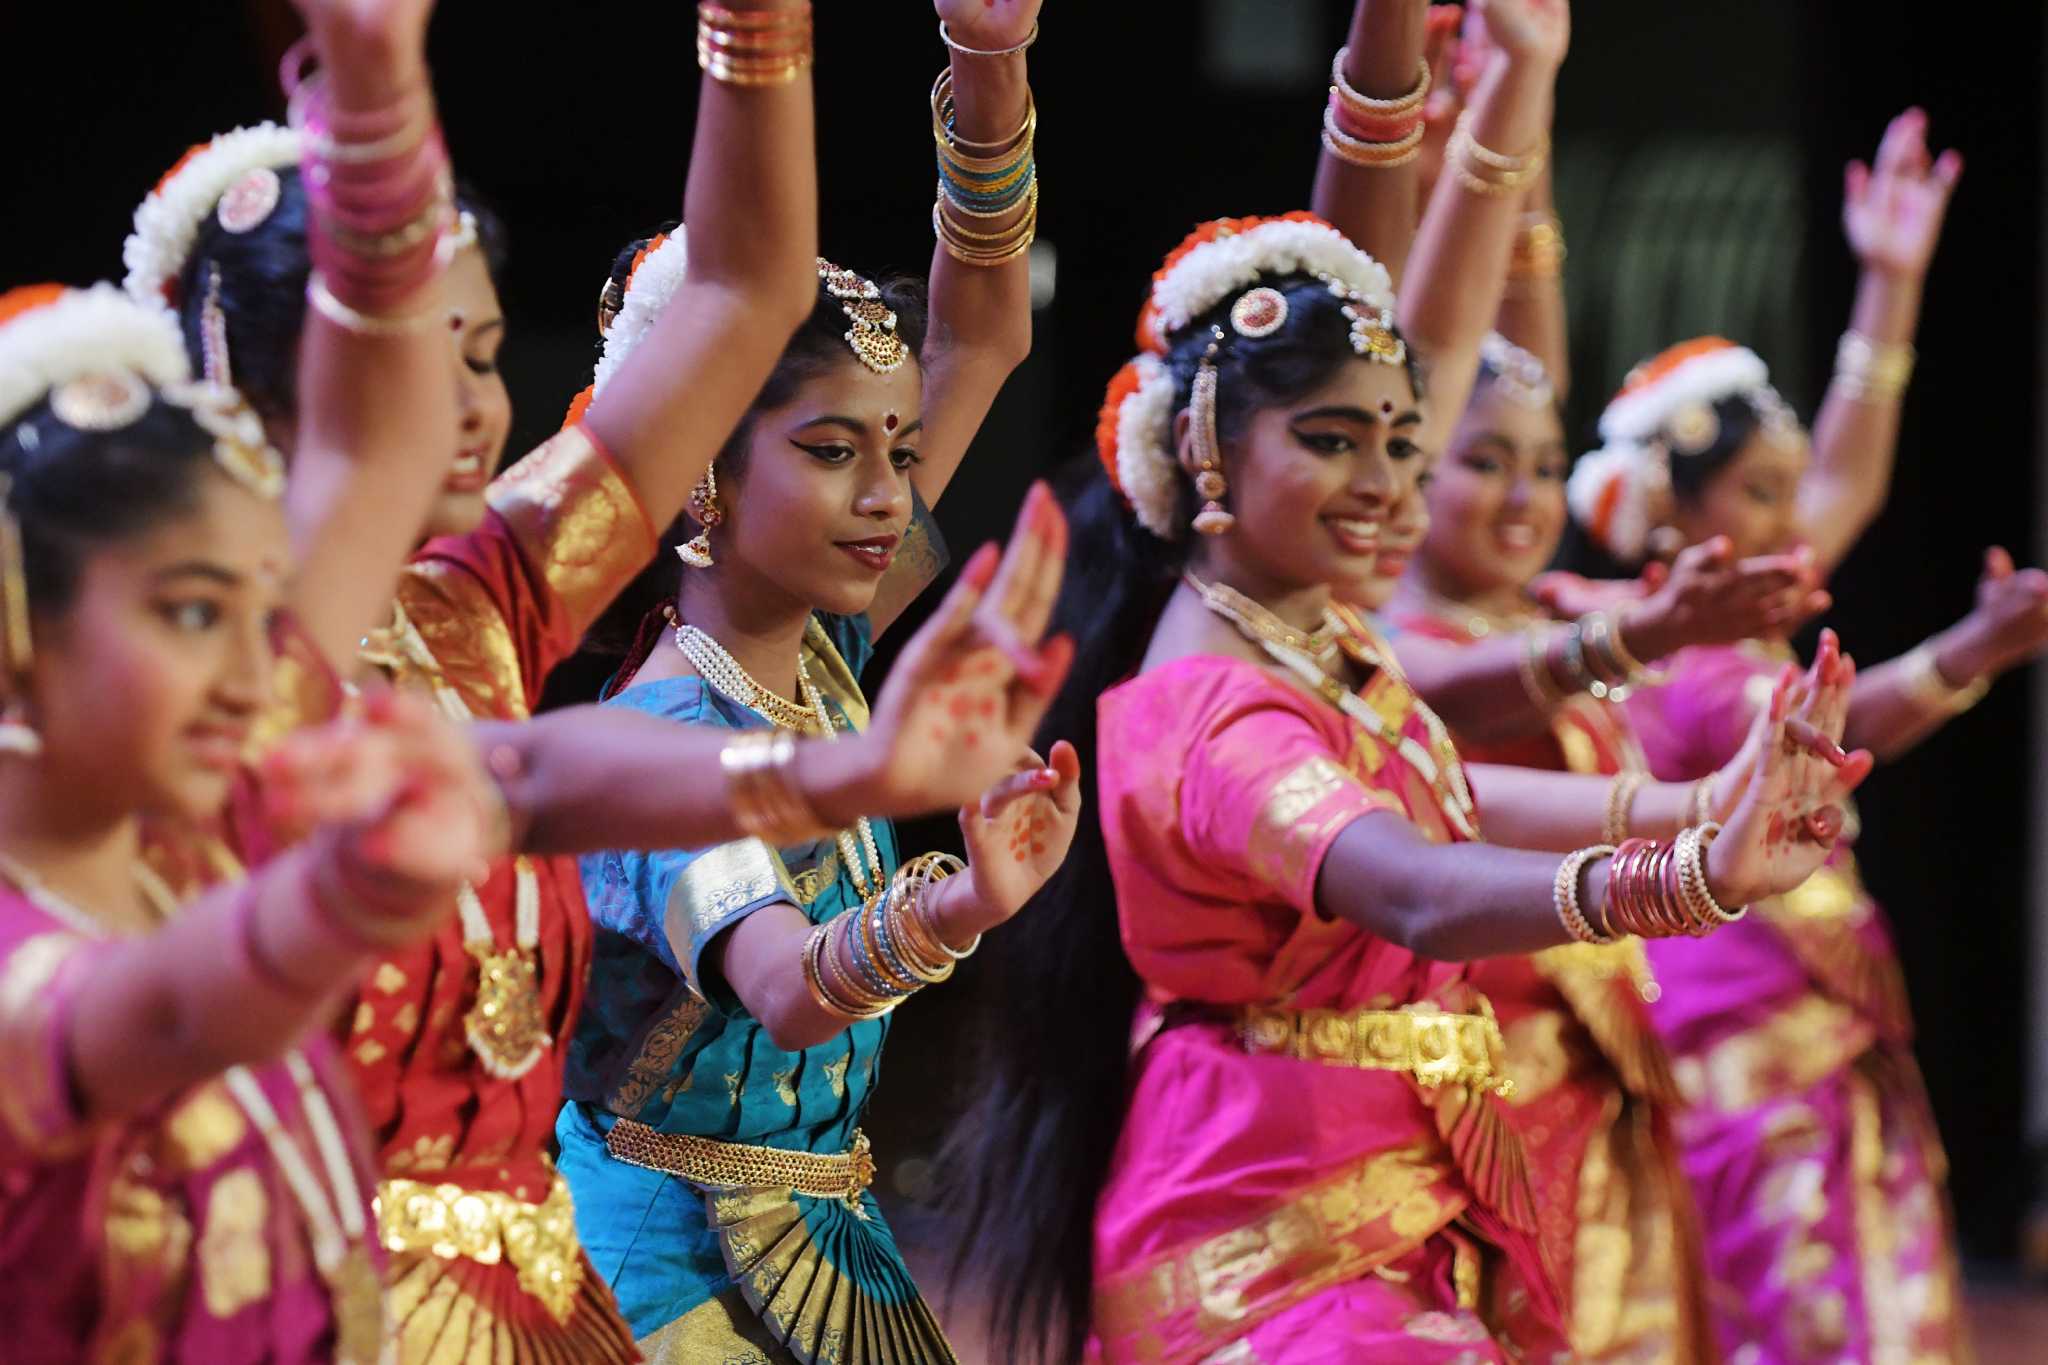 Photos: World cultures shine at Festival of Nations